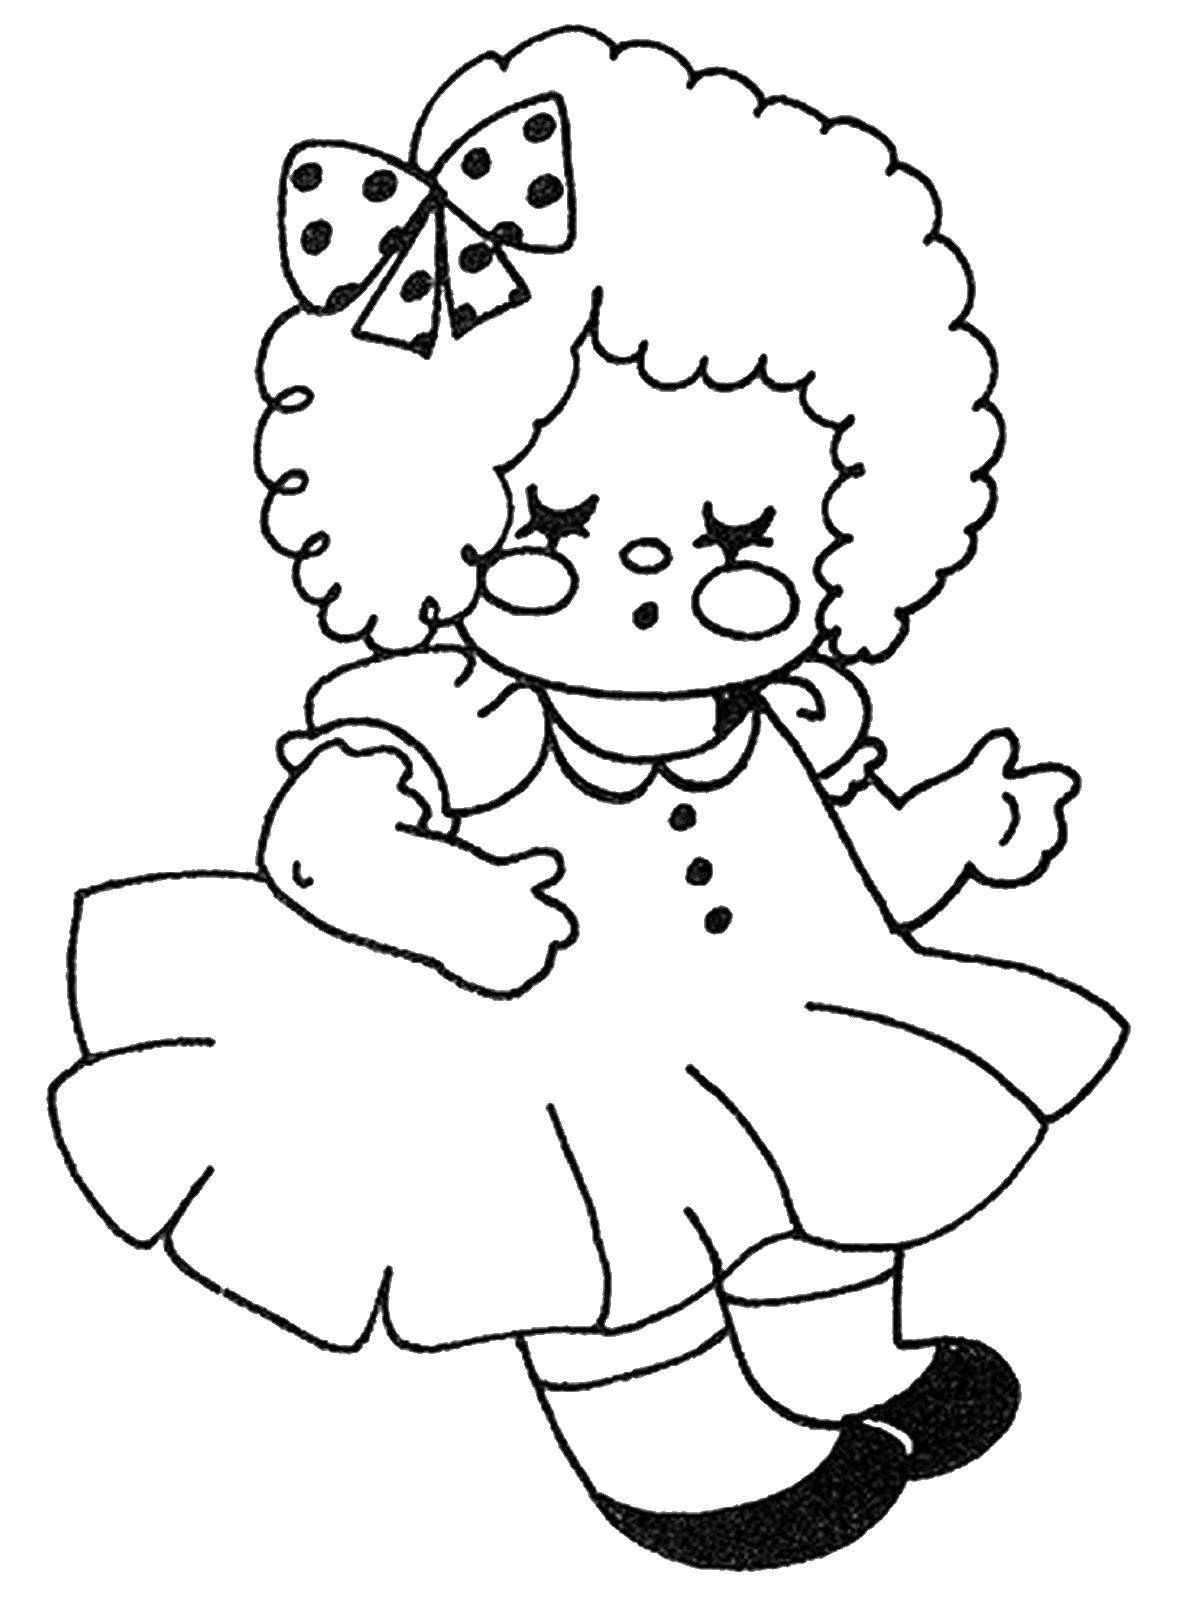 Coloring Doll. Category toy. Tags:  doll.